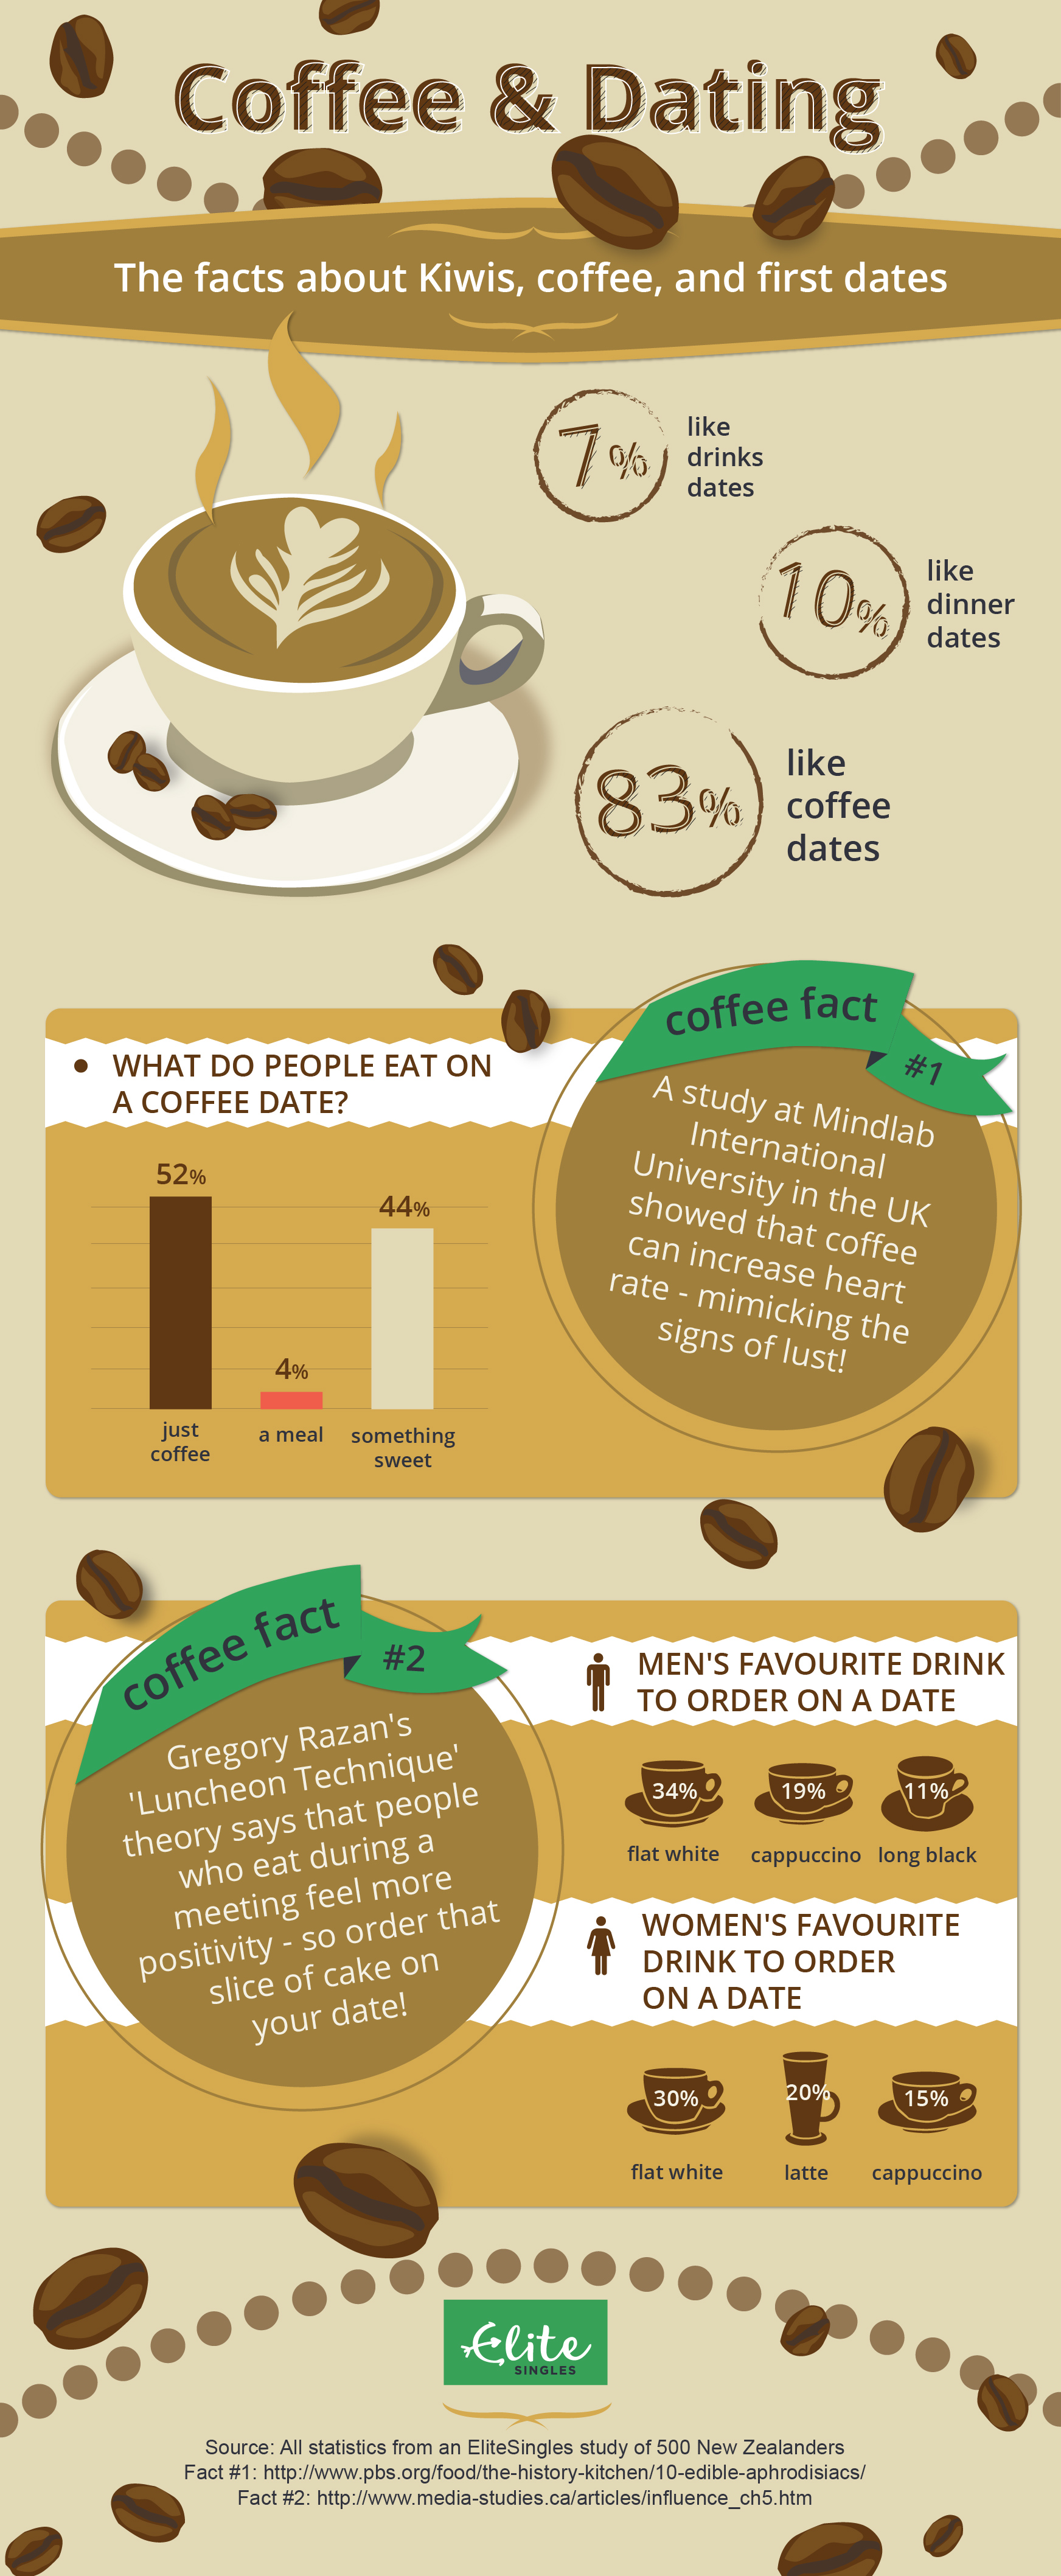 EliteSingles International Coffee Day infographic about the perfect coffee date